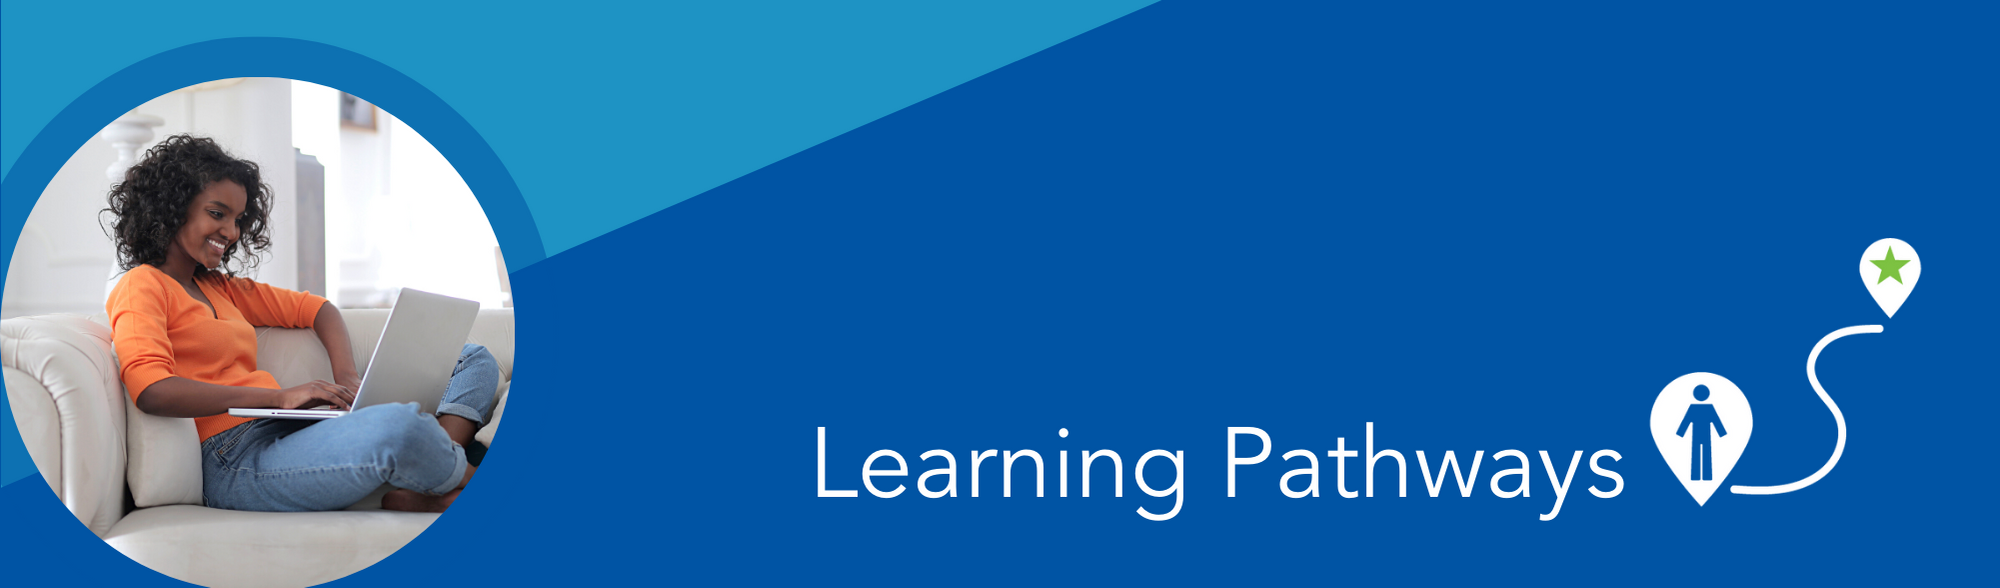 Learning Pathways Banners